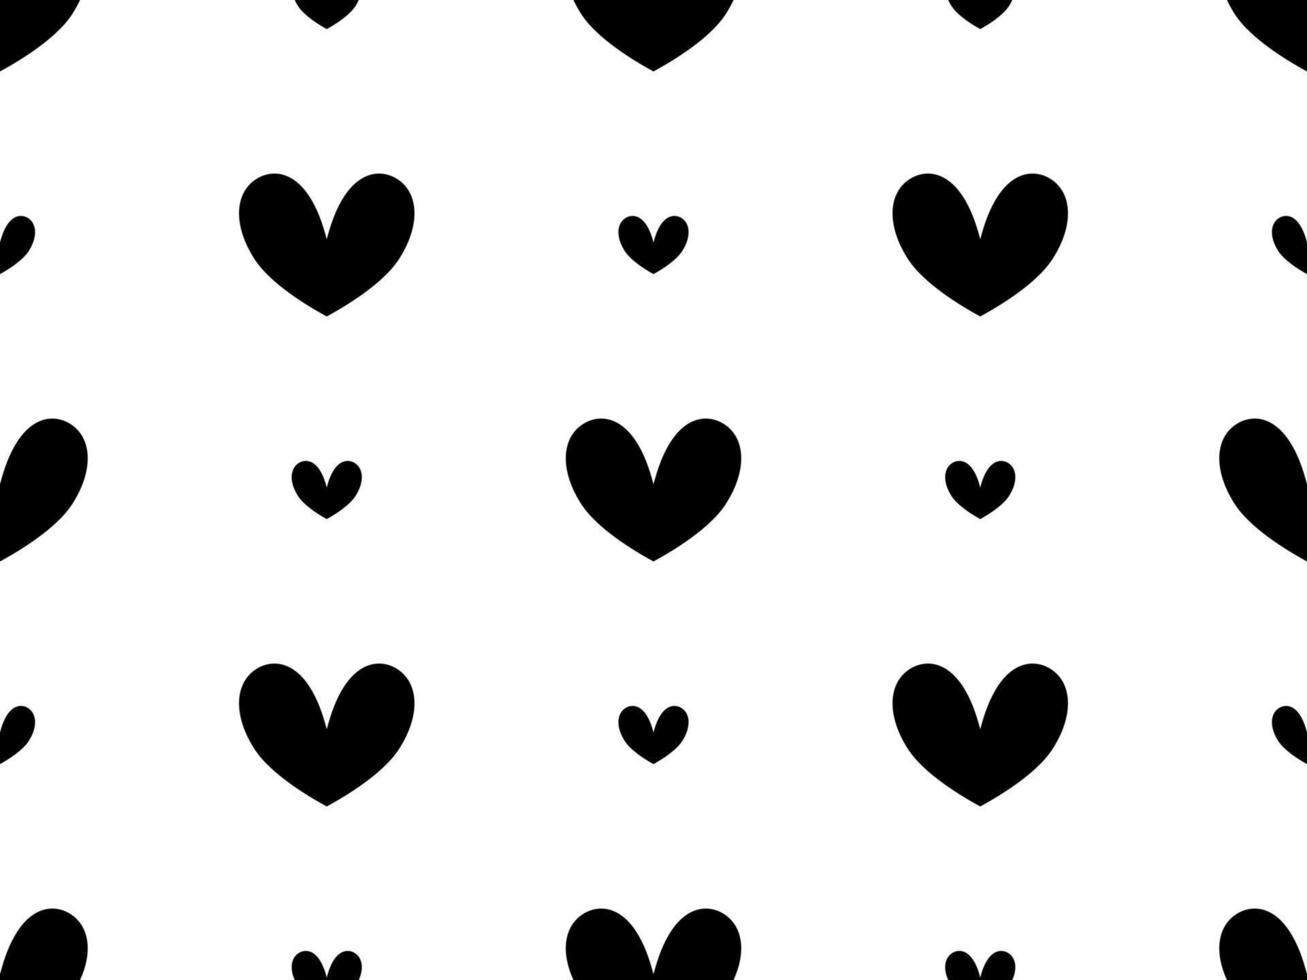 Heart cartoon character seamless pattern on white background vector